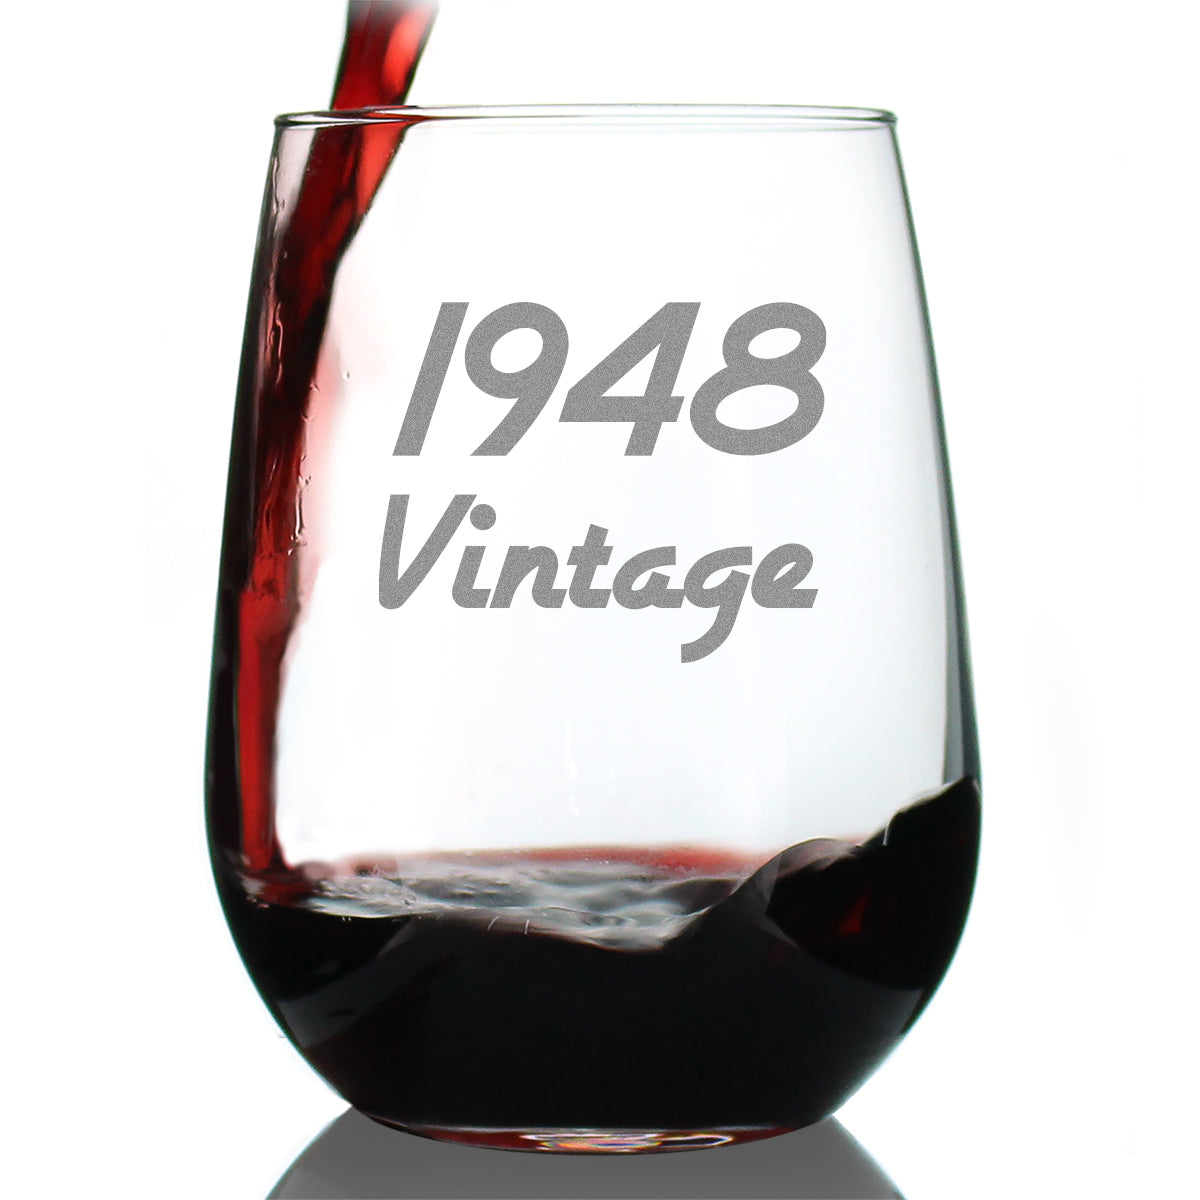 Vintage 1948 - 76th Birthday Stemless Wine Glass Gifts for Women &amp; Men Turning 76 - Bday Party Decor - Large Glasses